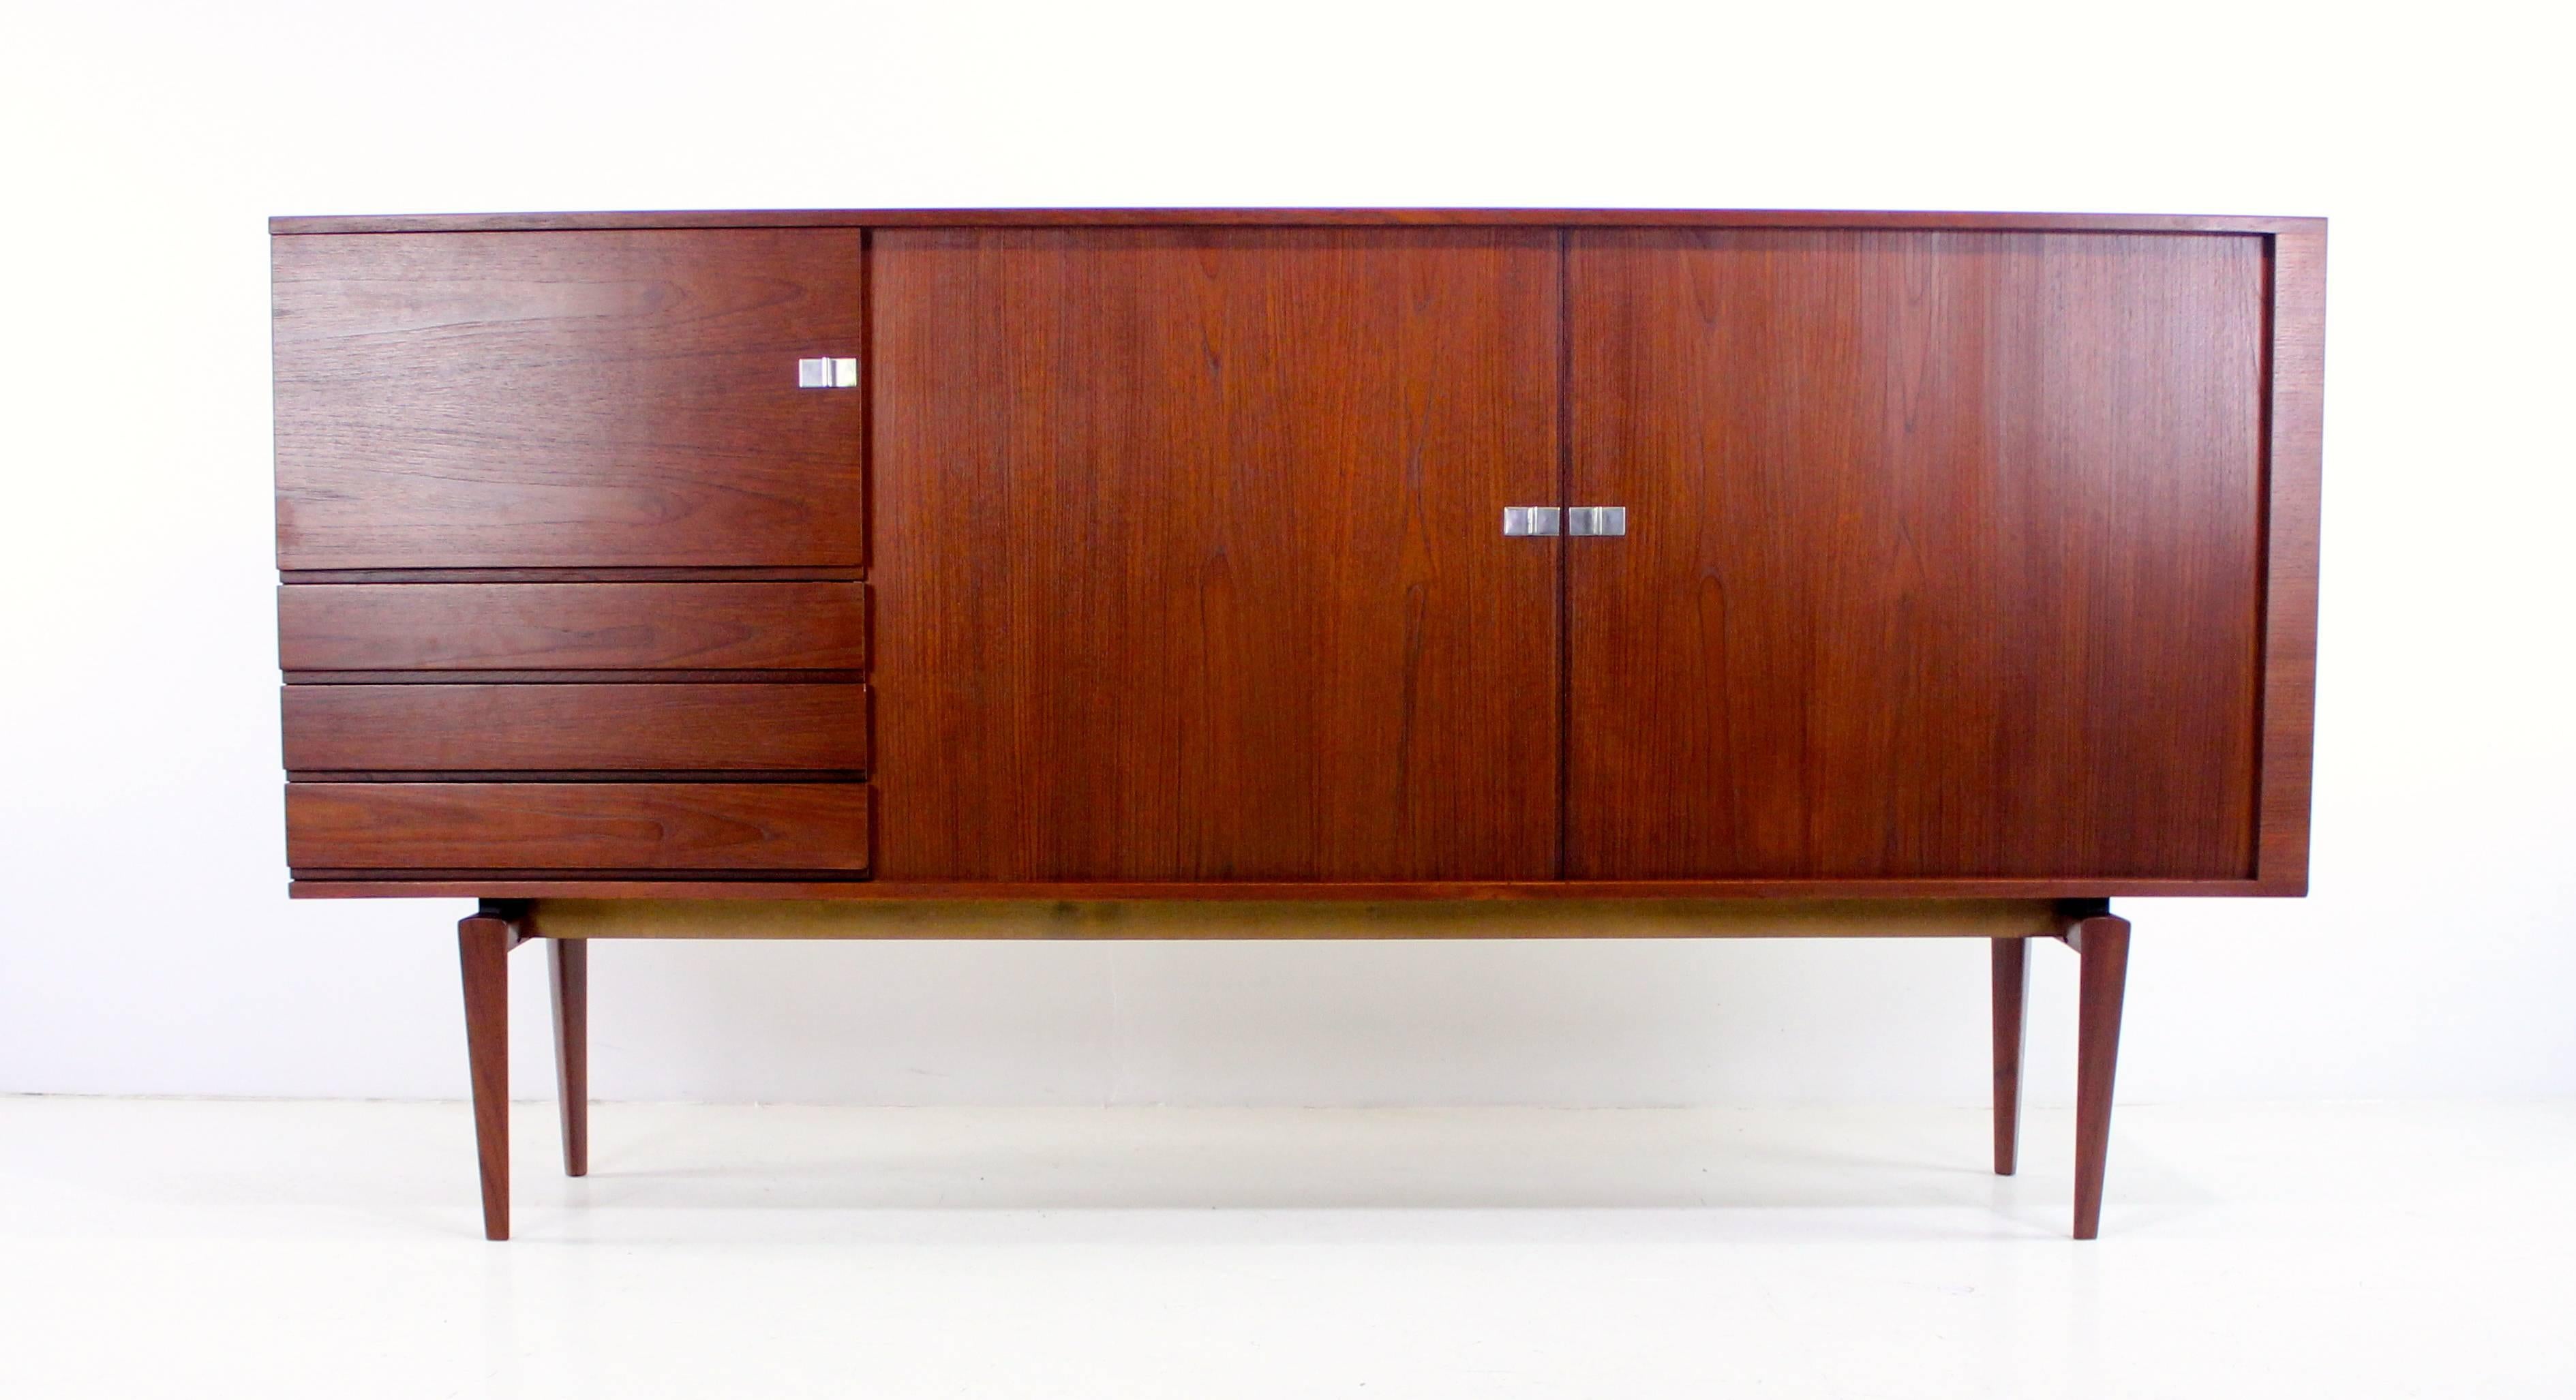 Danish modern credenza or sideboard from "Pamir" series designed by H.W. Klein in 1960.
Bramin, maker. Model #233.
Tambour doors on right, glide open to adjustable shelving.
Door on left opens to adjustable shelf above three